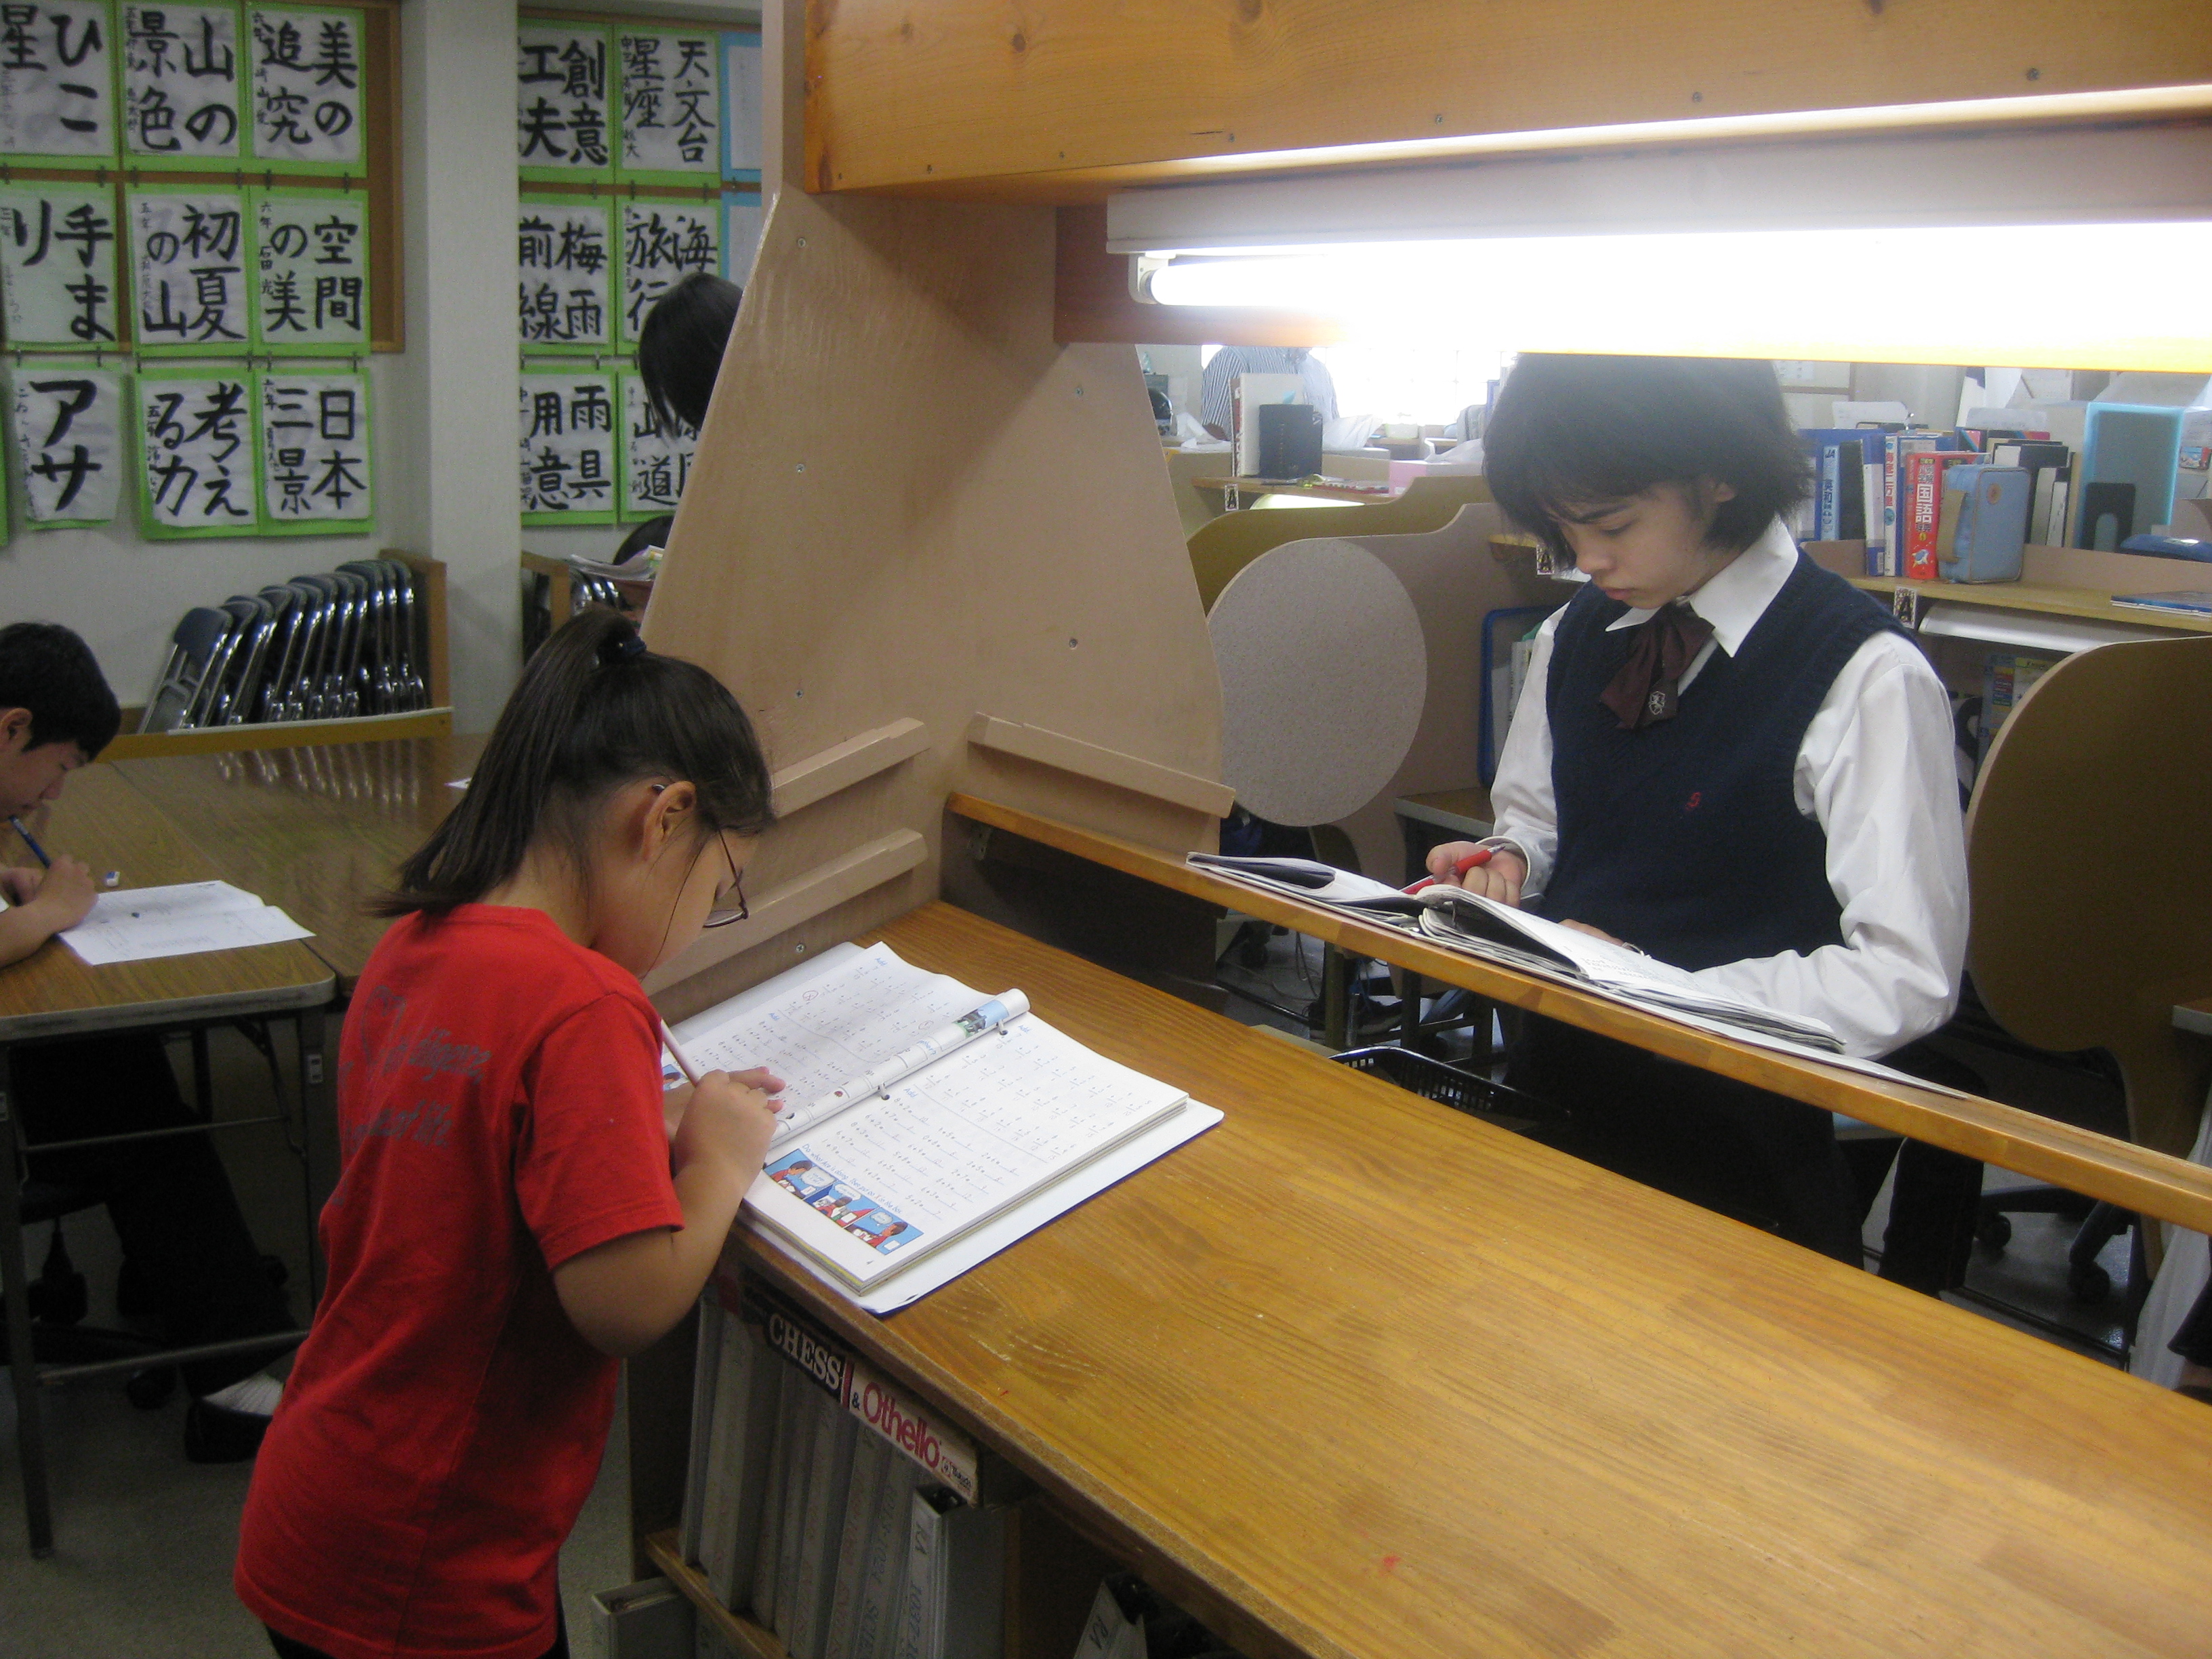 Students checking their work